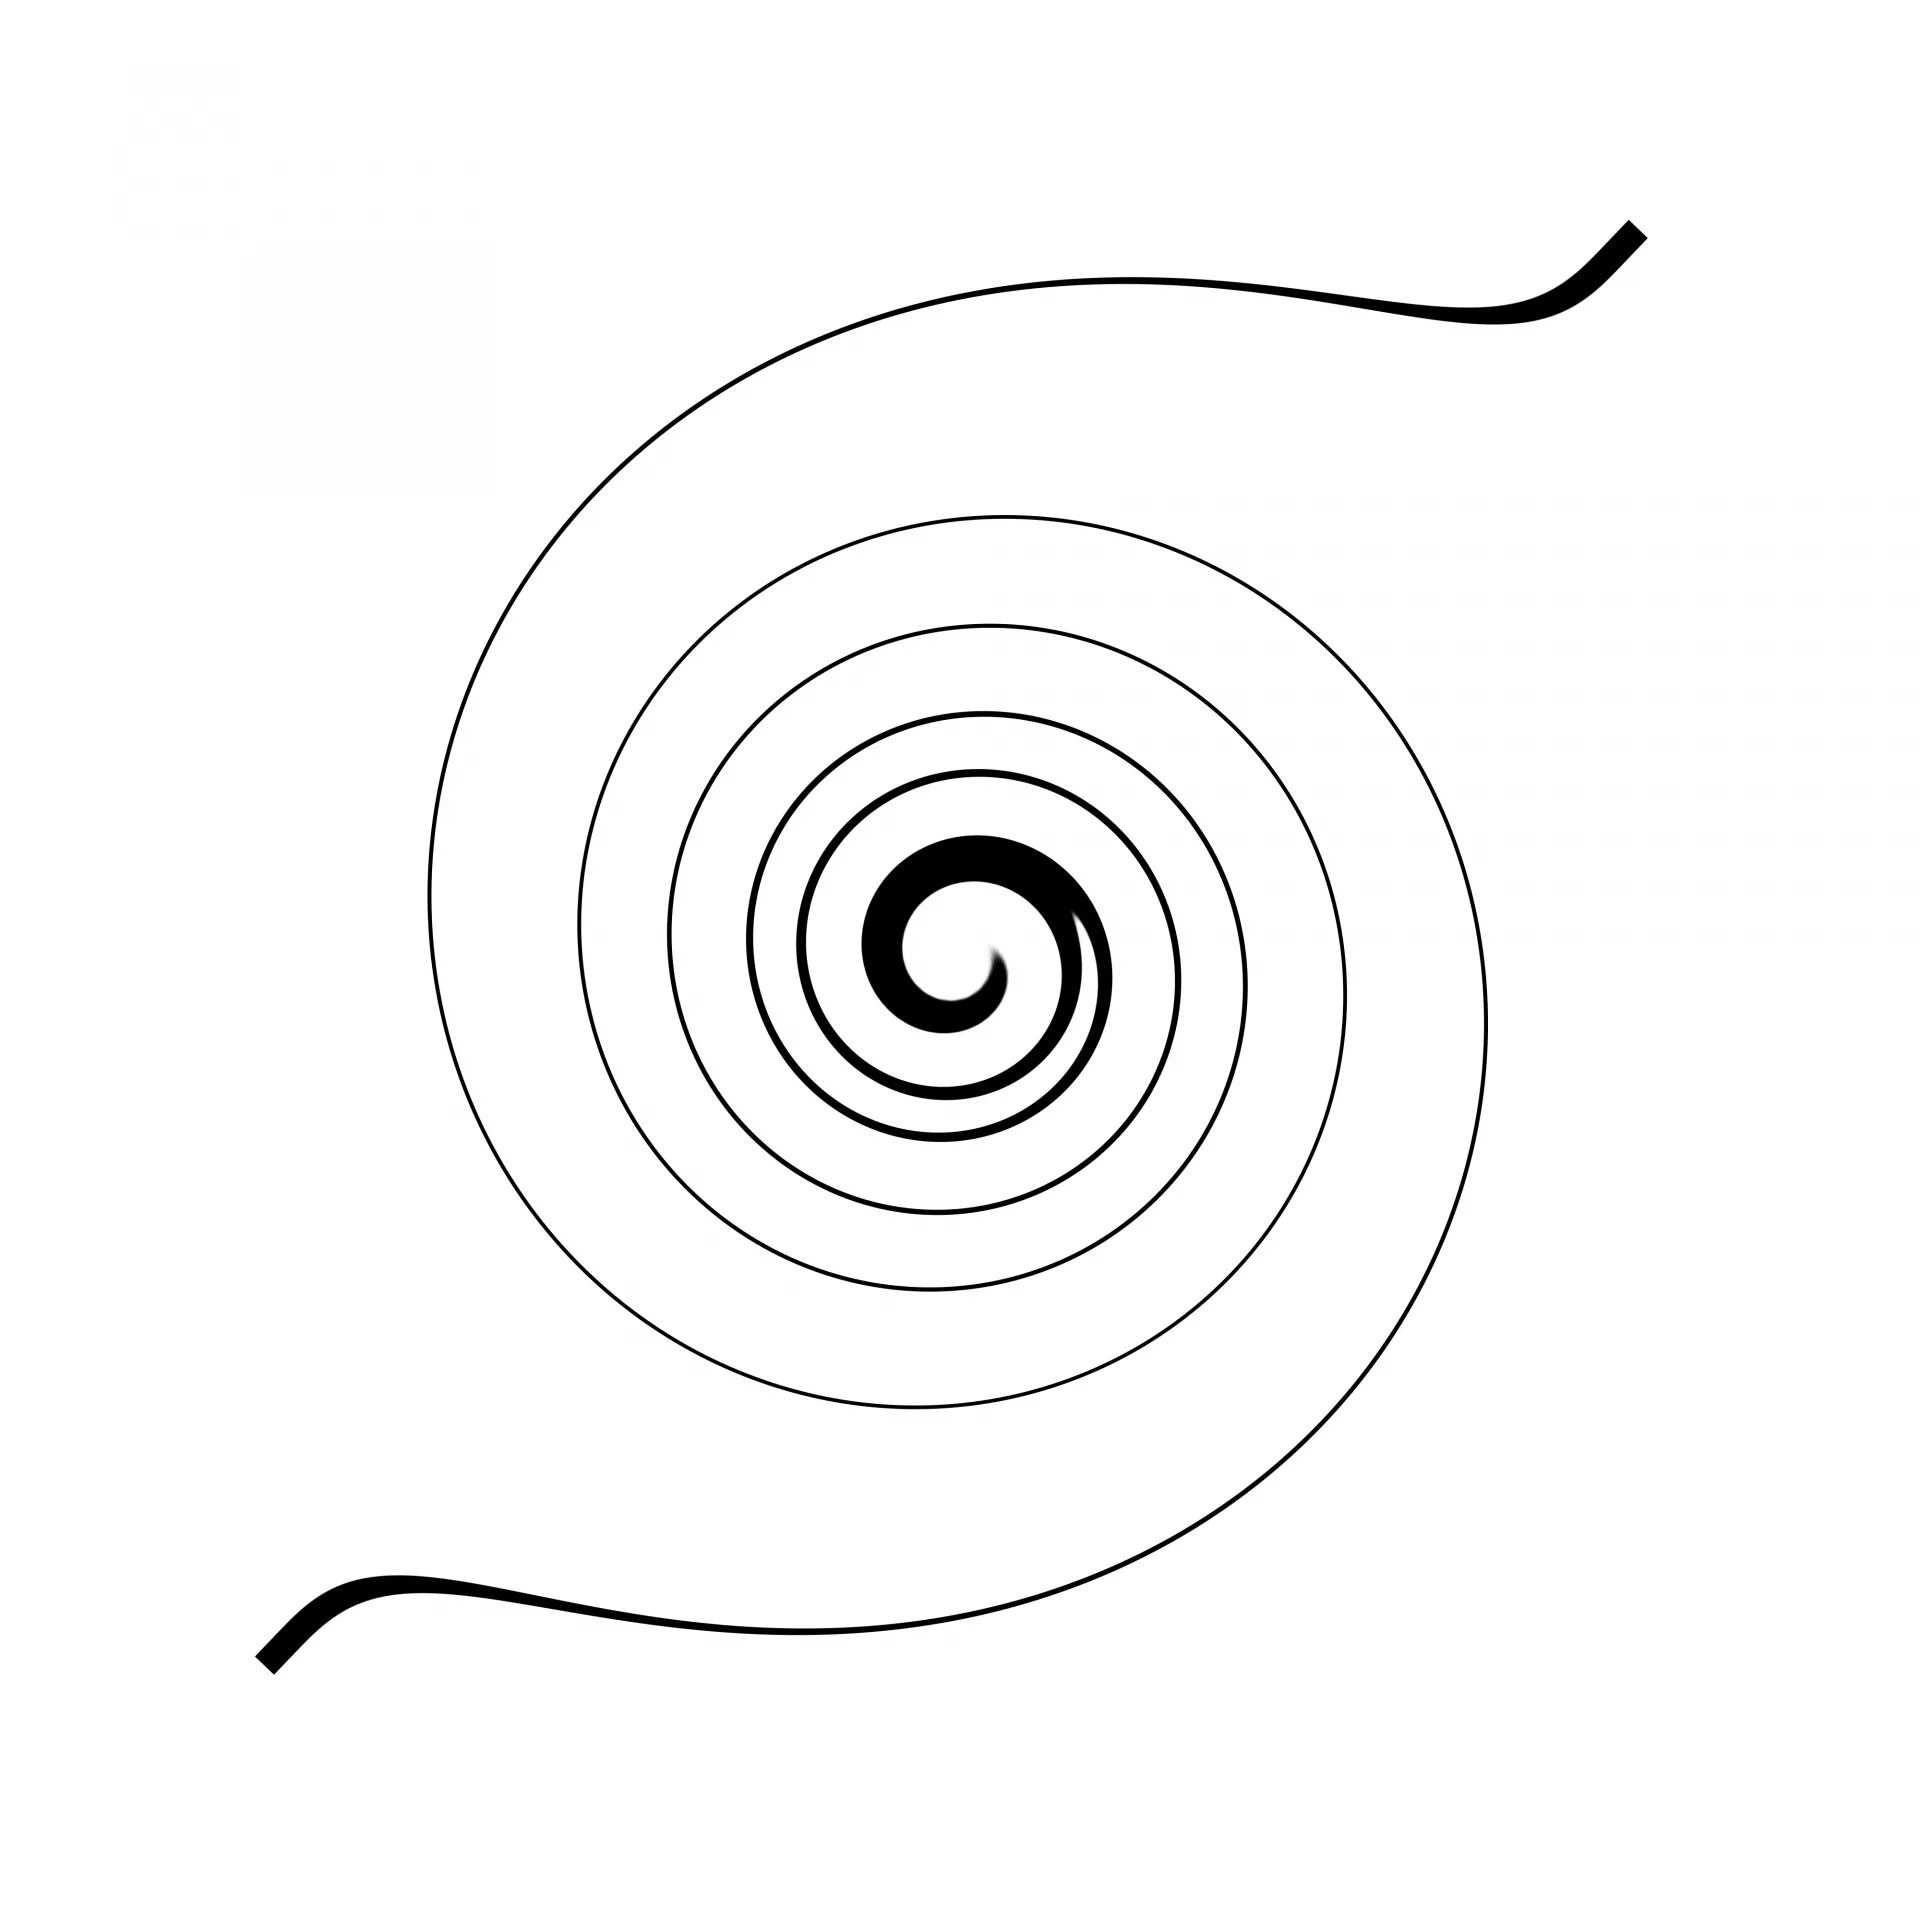 Intriguing coloring page with swirling lines